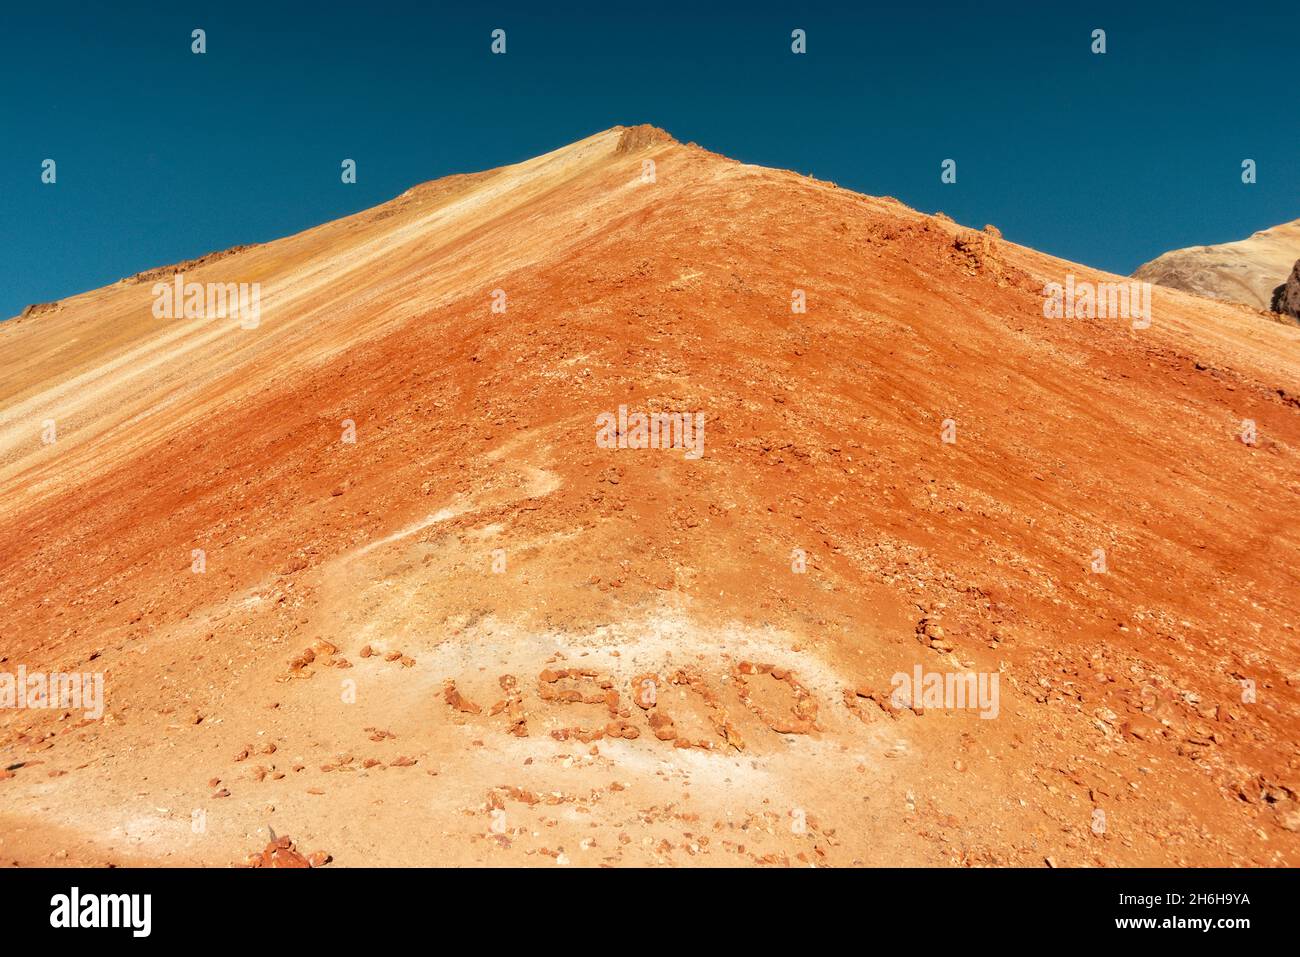 volcanic Bolivian landscape with stone sign of 4900 meters at the bottom of the slope Stock Photo